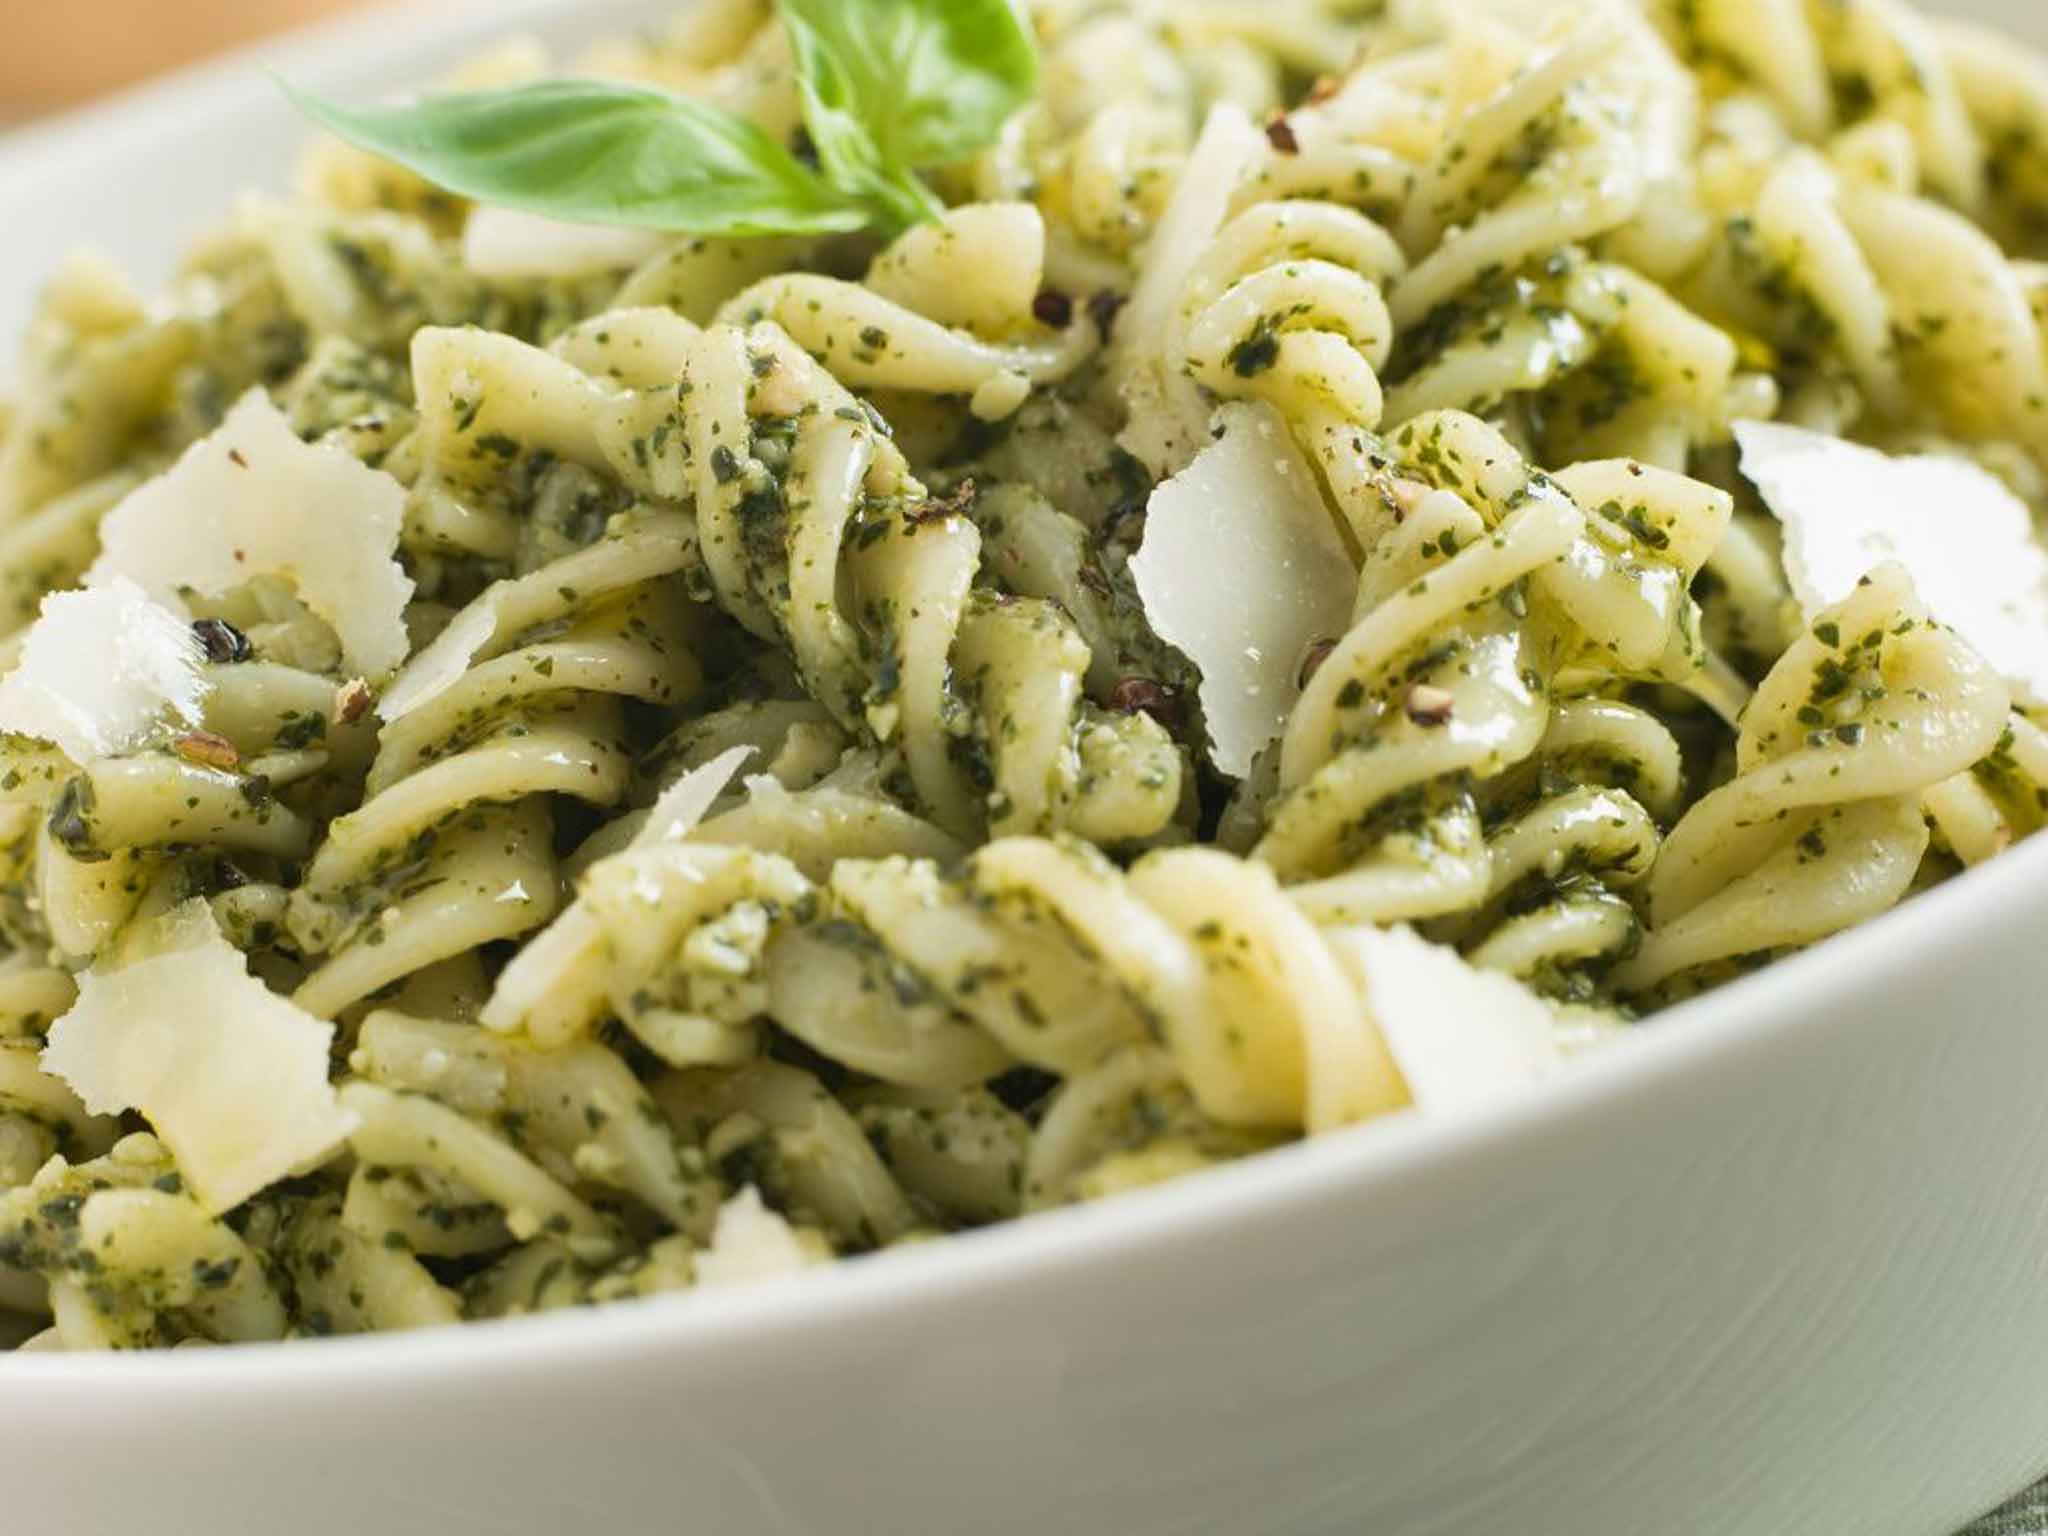 Going nuts: fusilli with pesto